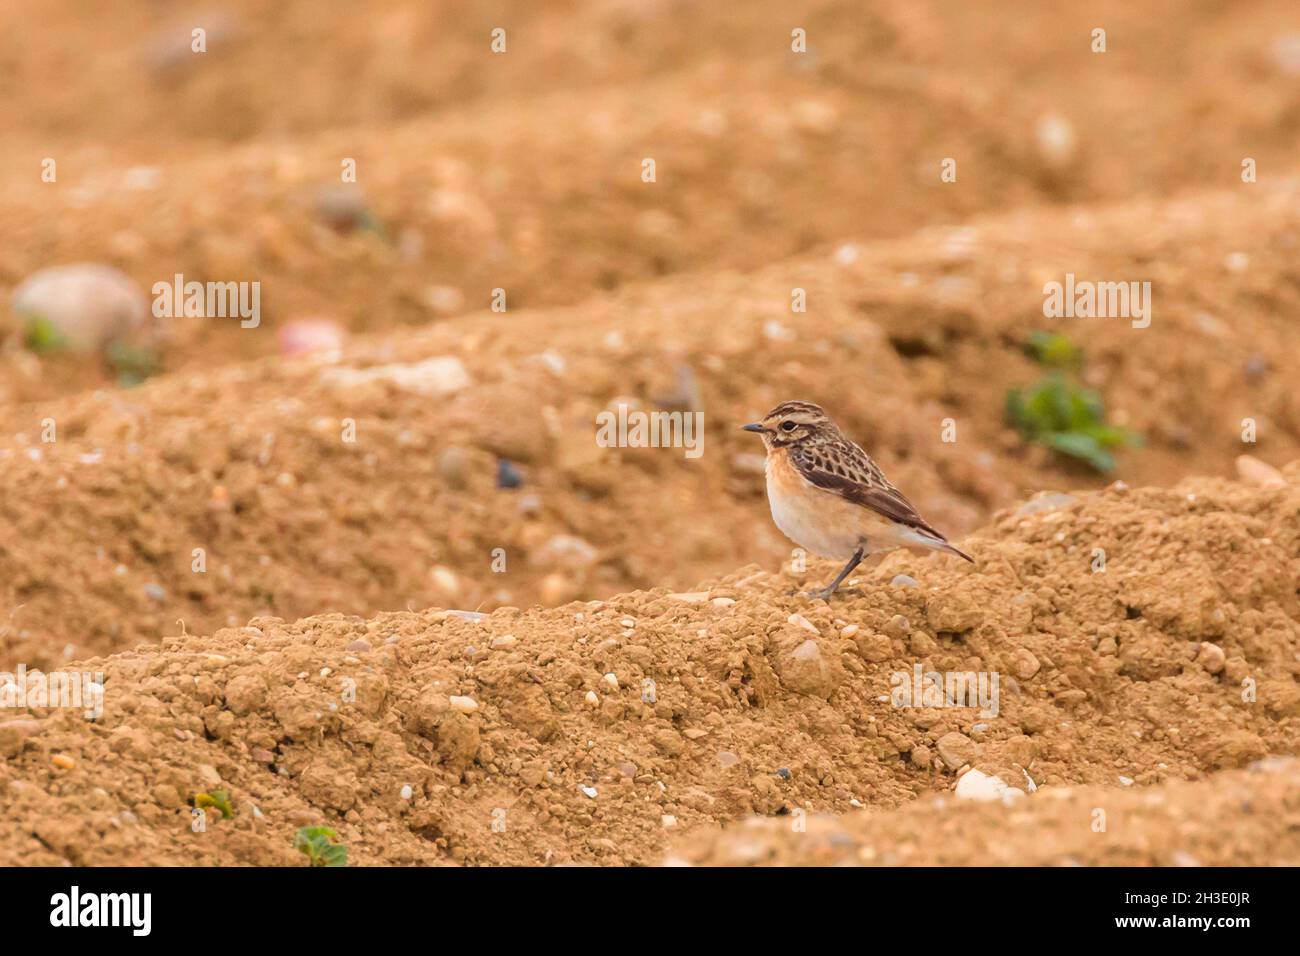 whinchat (Saxicola rubetra), sits on a furrow in a field, Germany Stock Photo